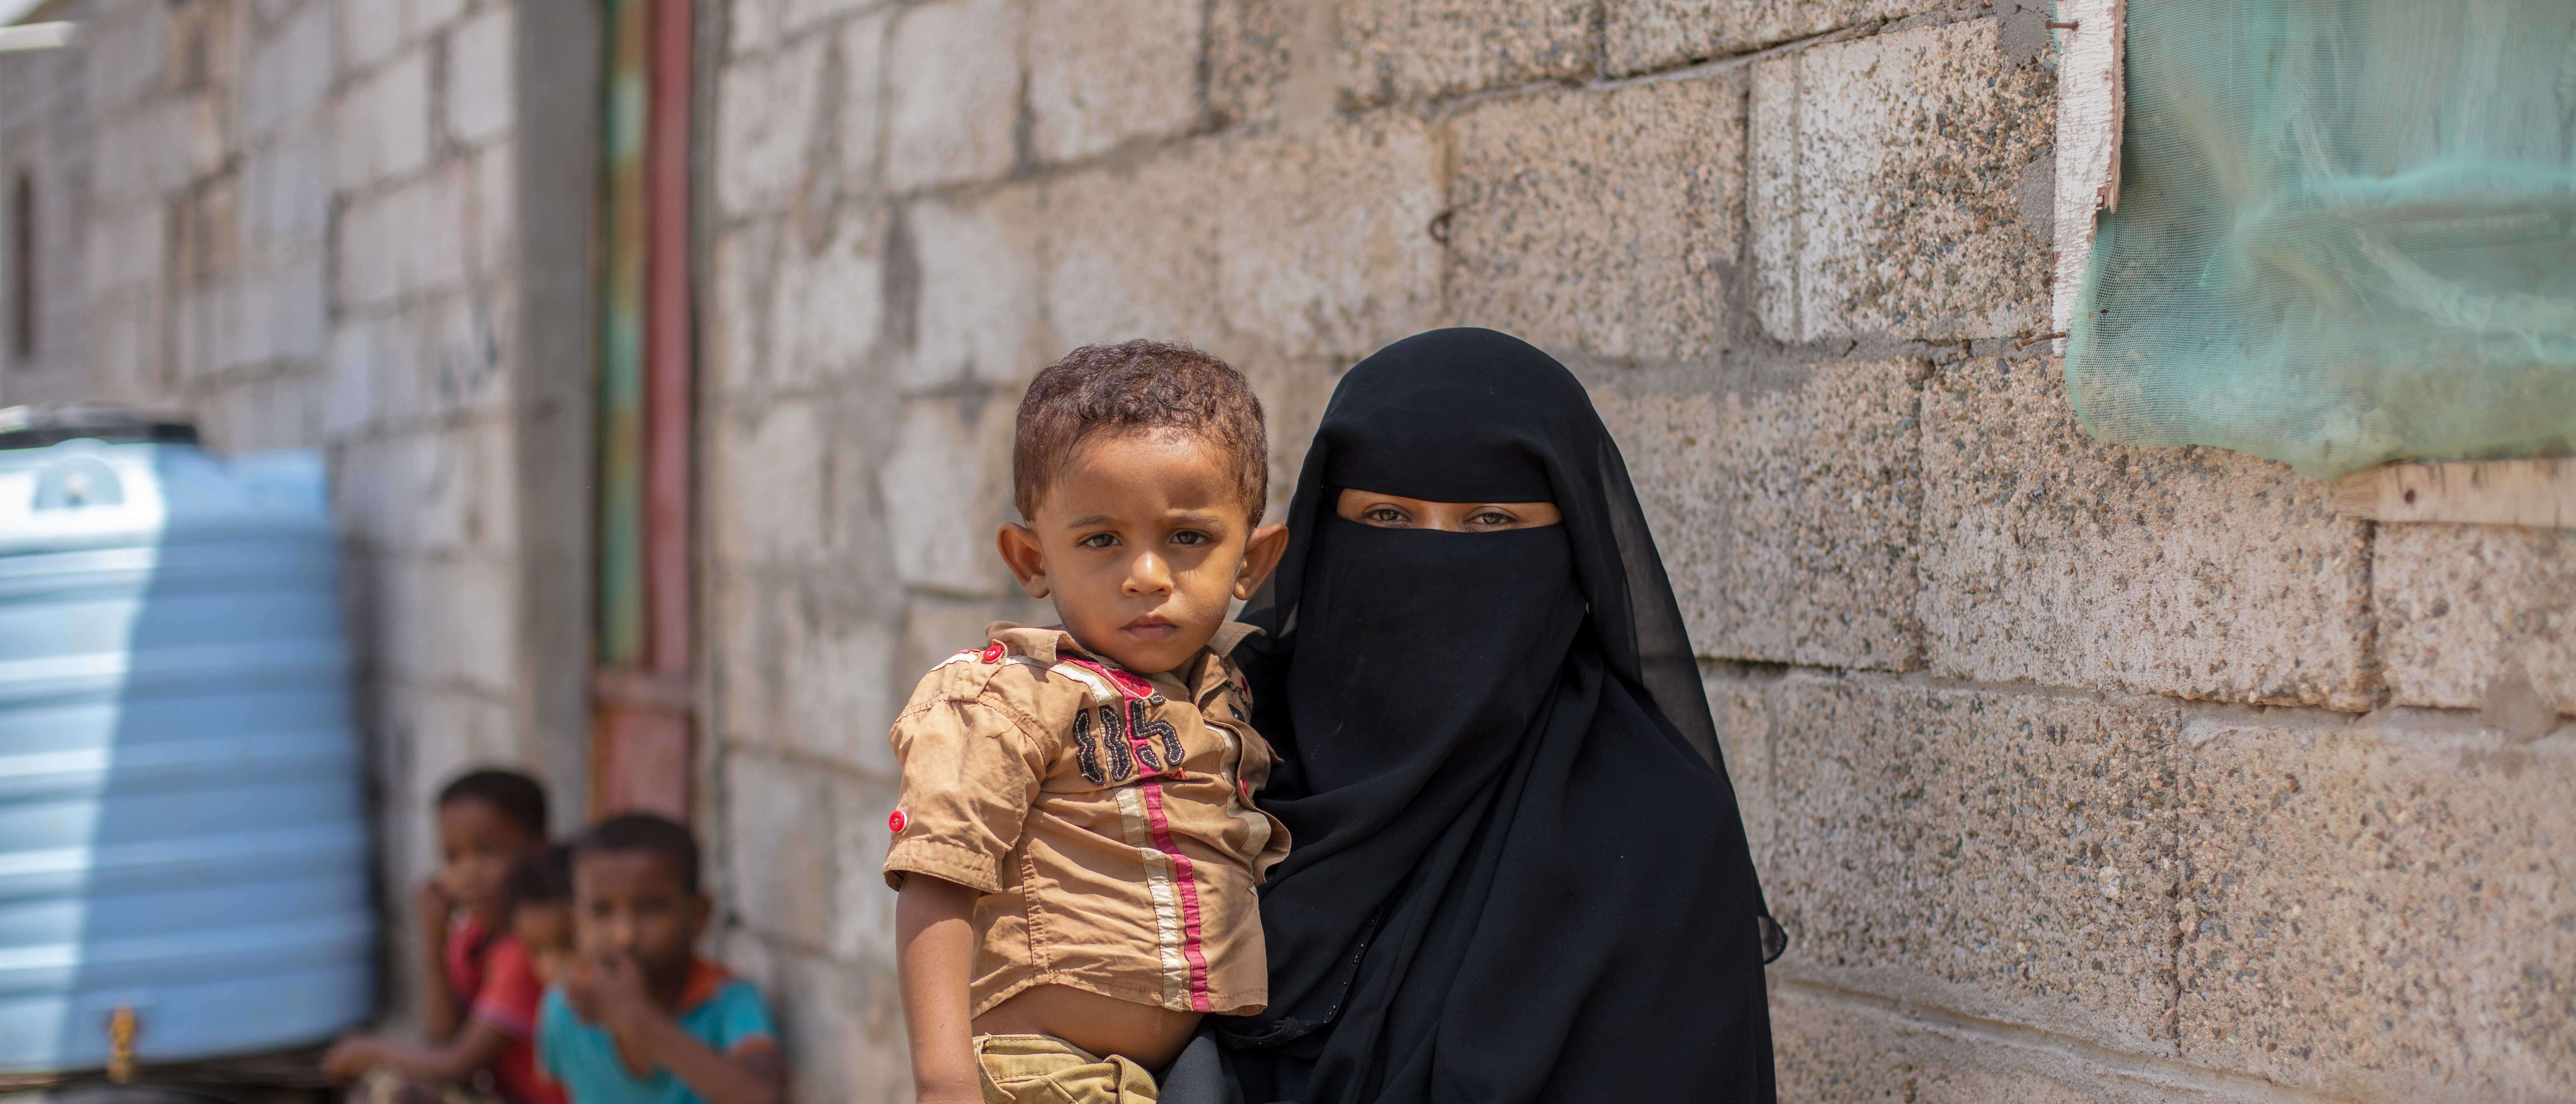 A Yemenese mother and daughter pose for a photo.